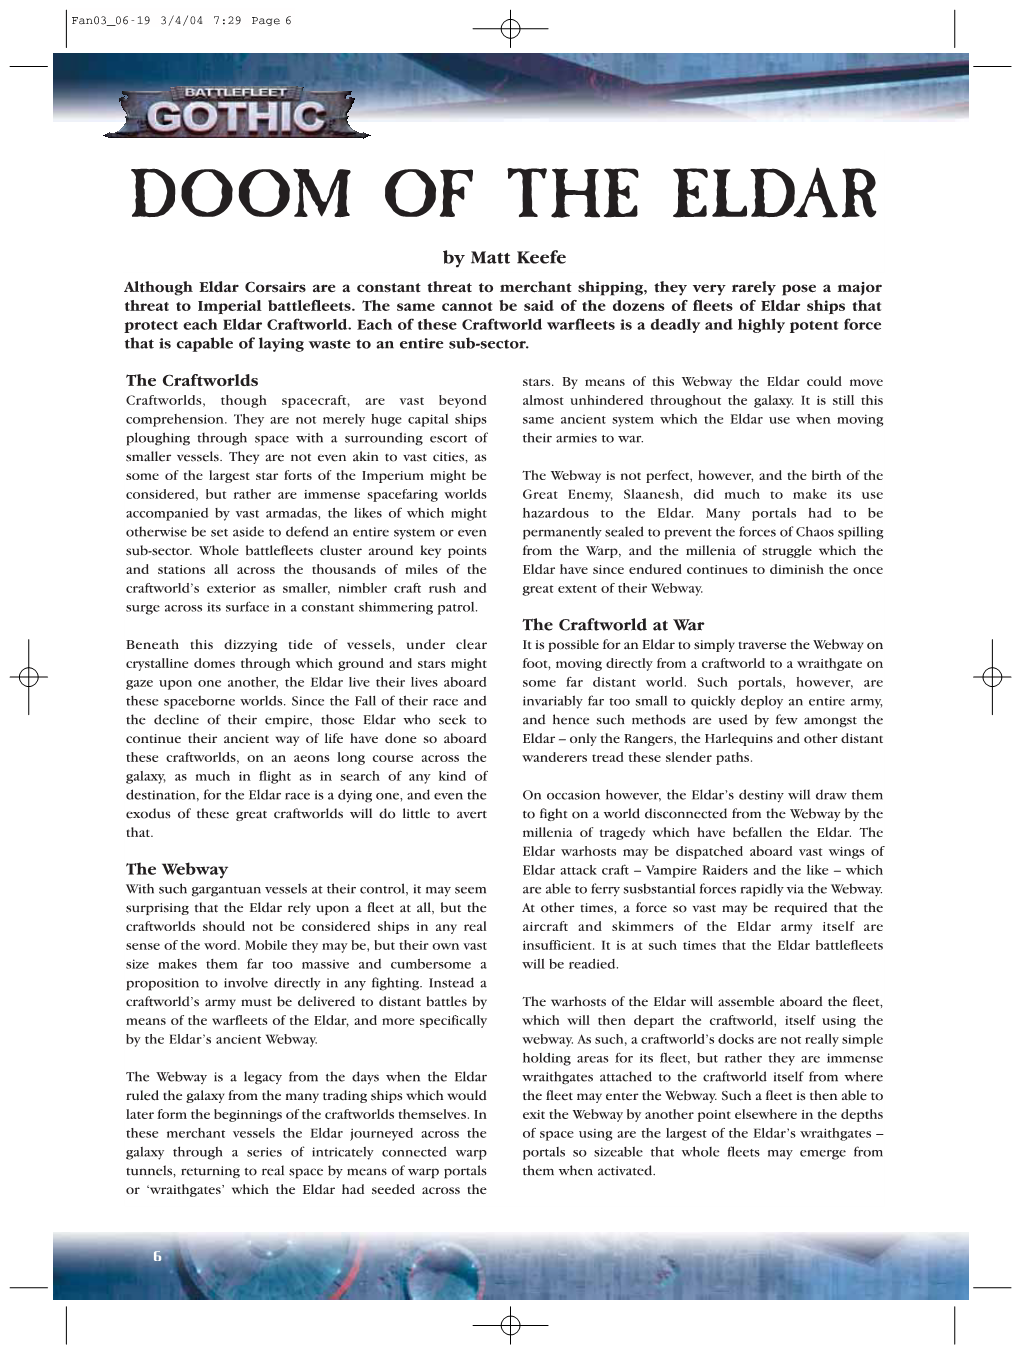 DOOM of the ELDAR by Matt Keefe Although Eldar Corsairs Are a Constant Threat to Merchant Shipping, They Very Rarely Pose a Major Threat to Imperial Battlefleets